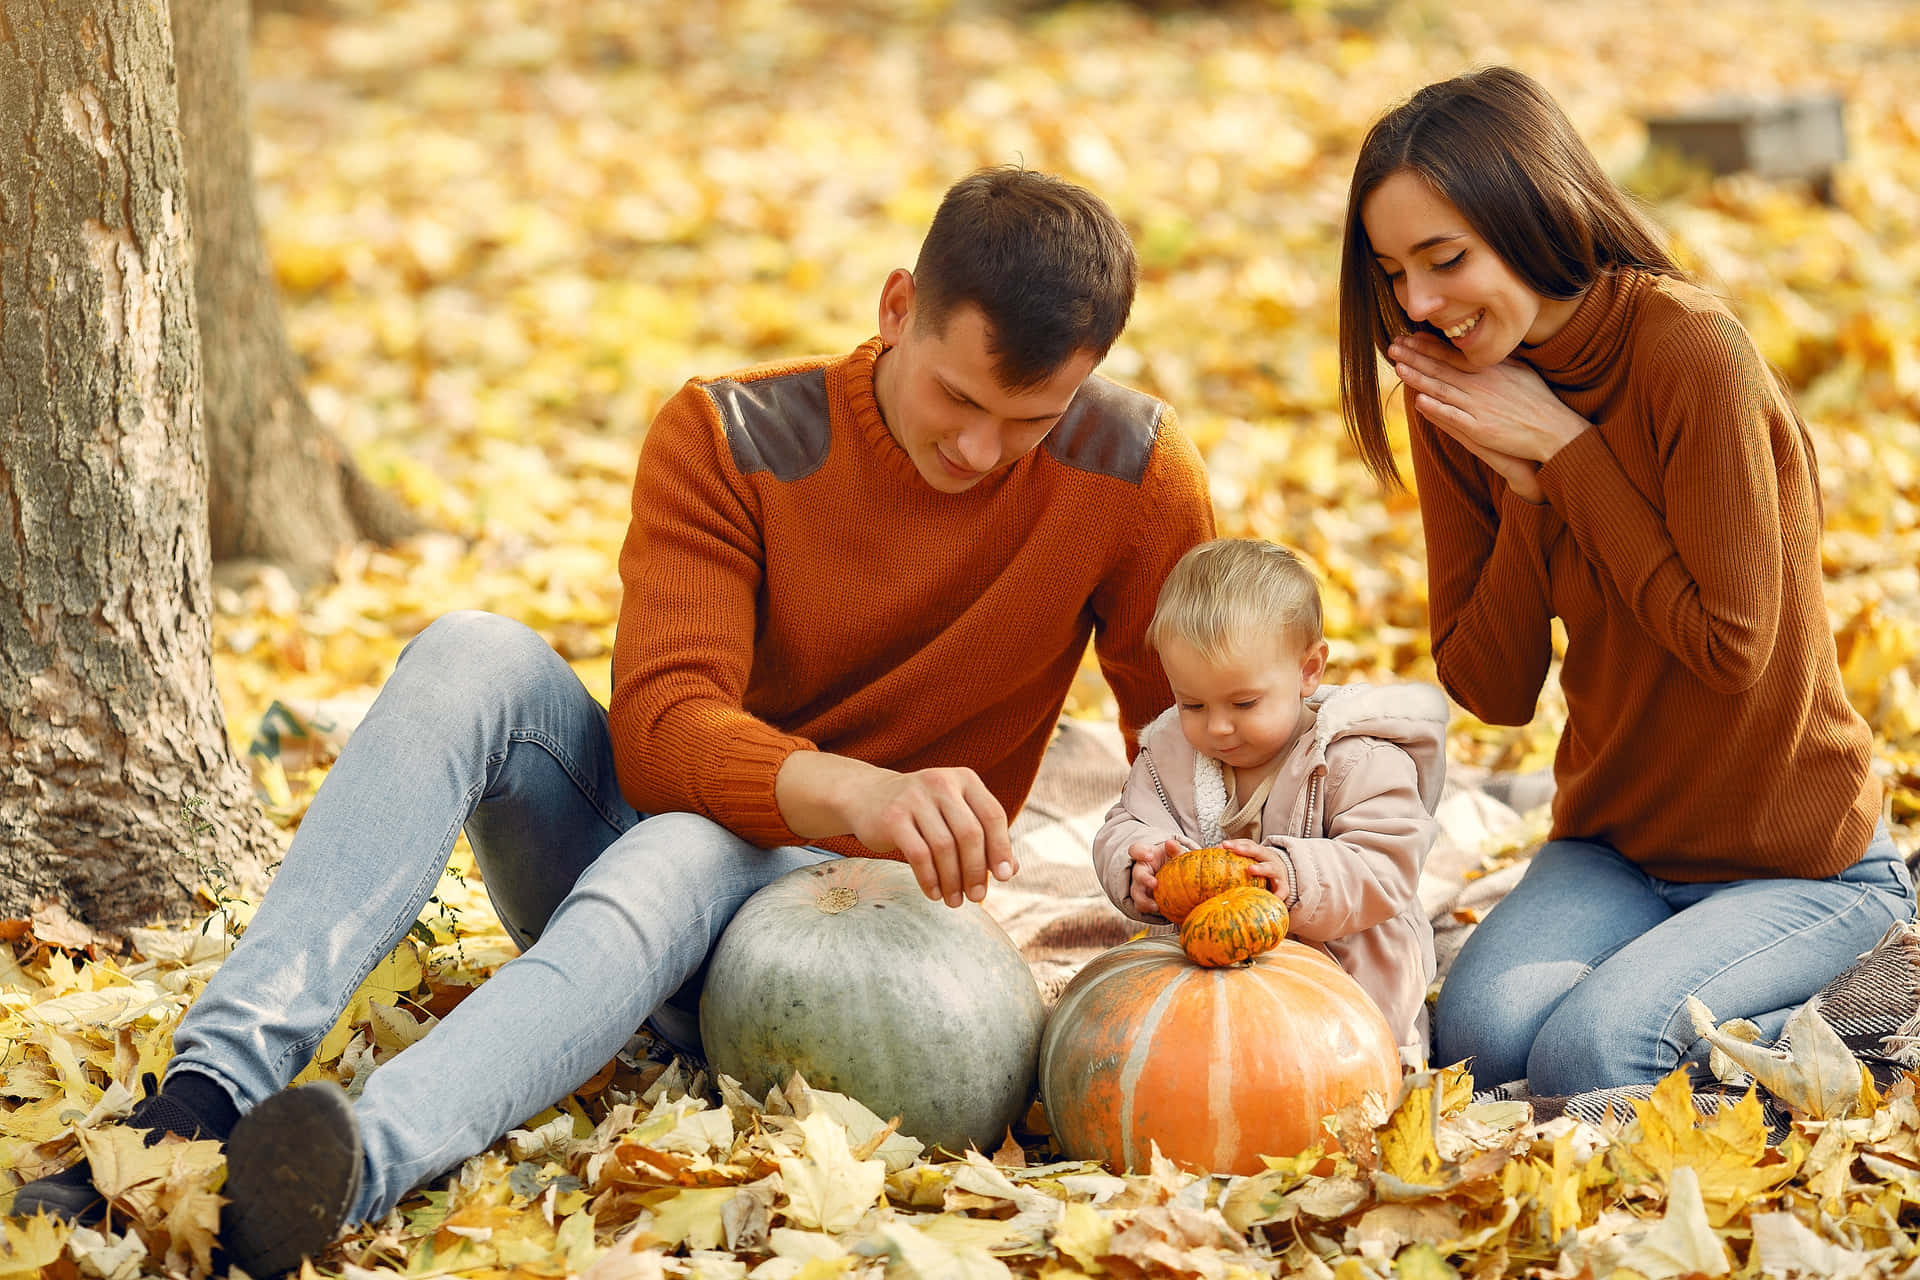 Capture the memory of Fall with your family